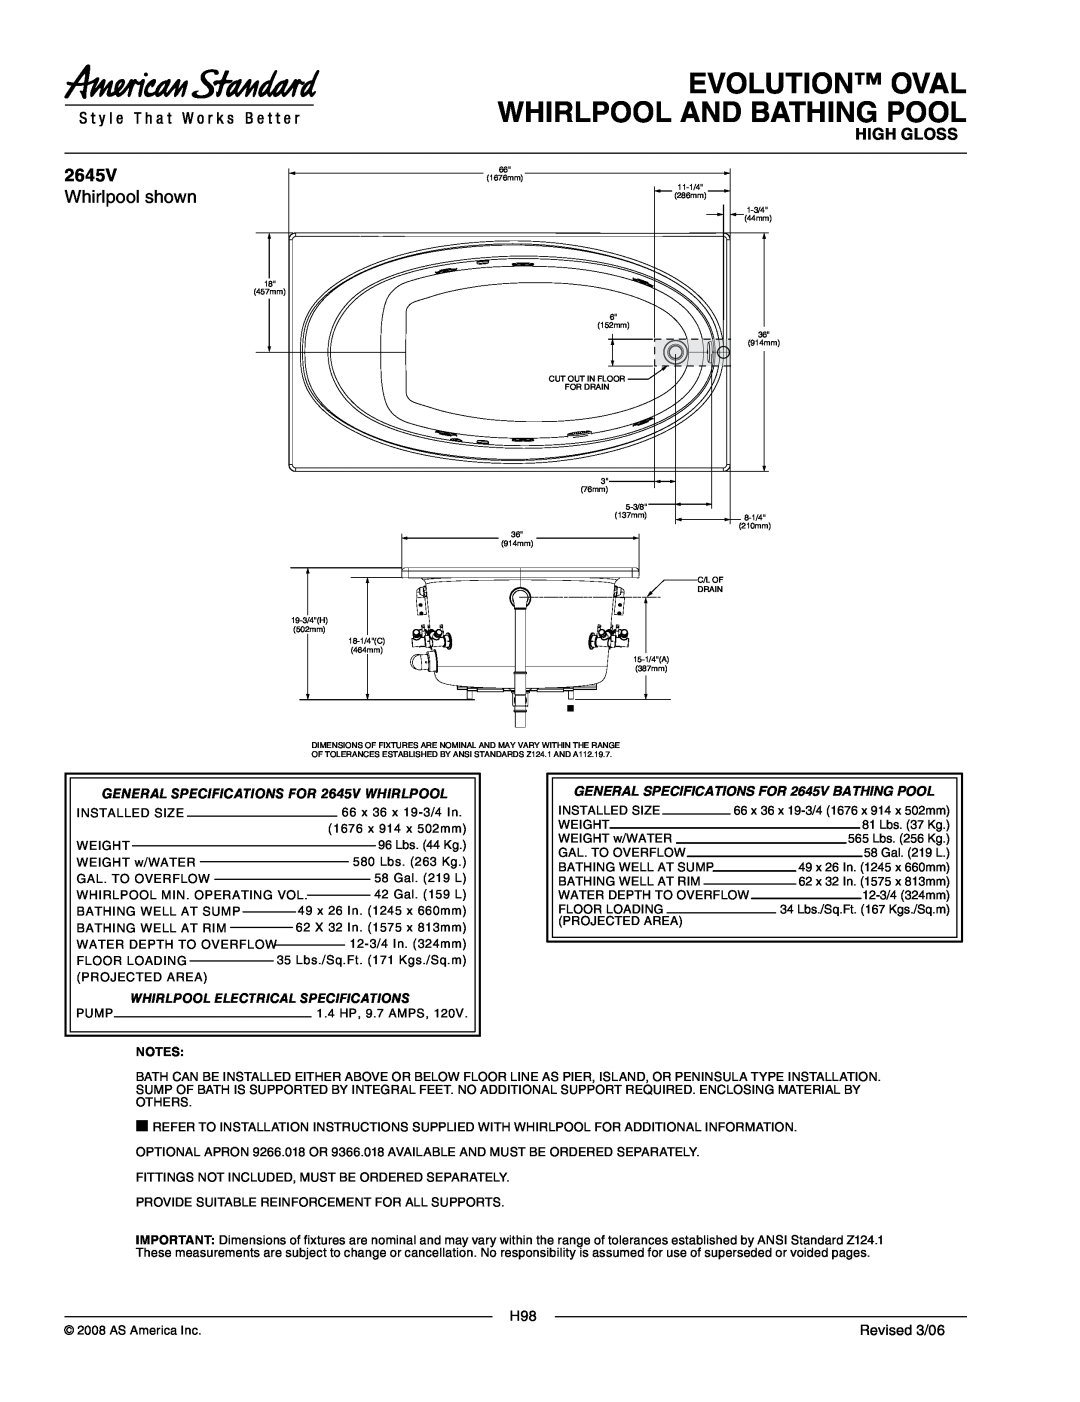 American Standard 2645VC, 2645V.002 dimensions Evolution Oval Whirlpool And Bathing Pool, High Gloss, Revised 3/06 